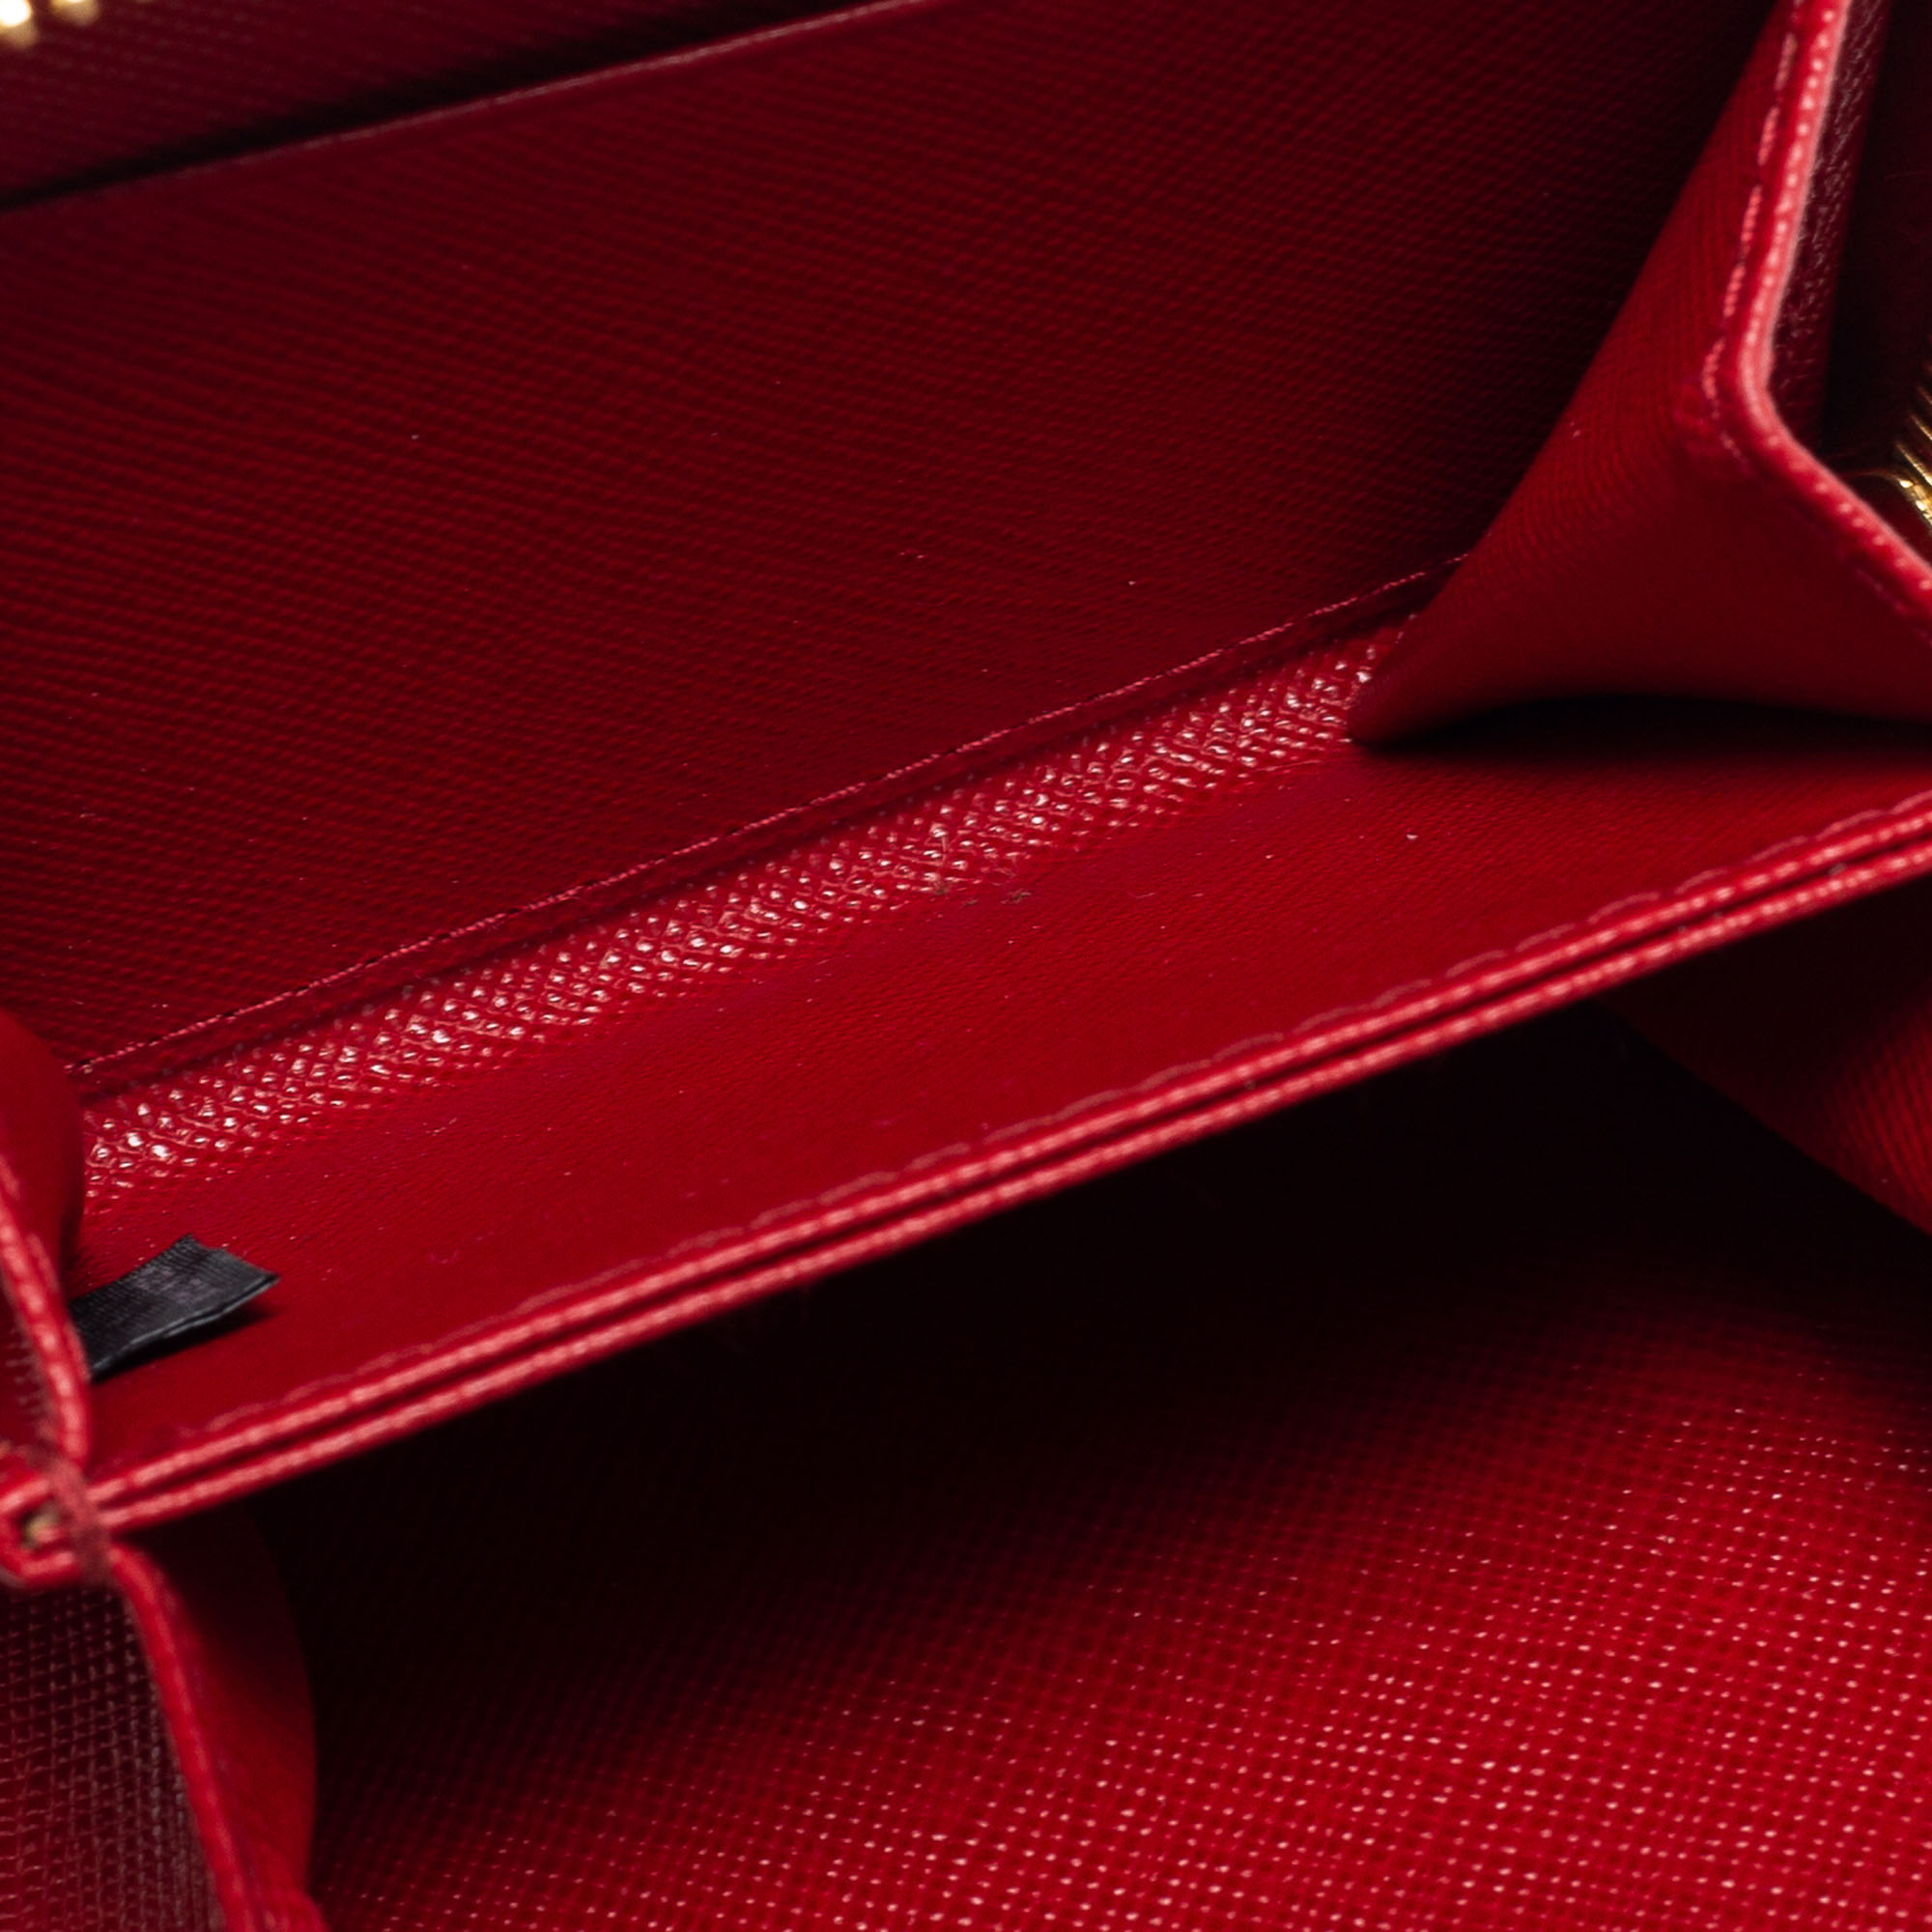 

Prada Red Saffiano Lux Leather Zip Around Compact Wallet